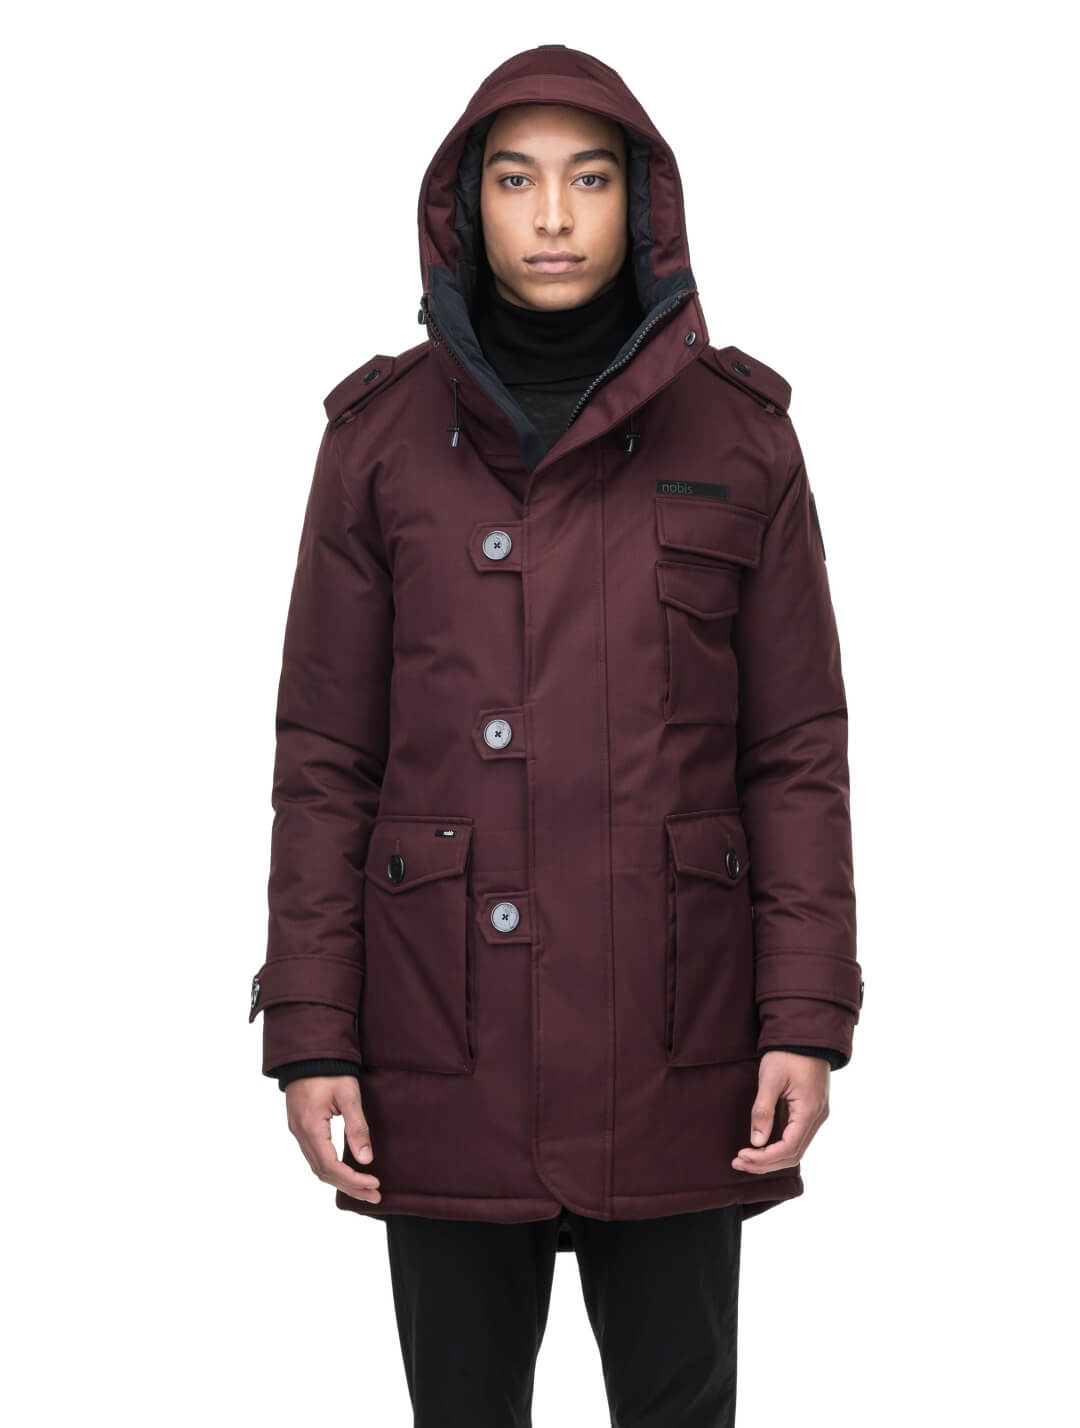 Men's down filled parka with faux button magnet closures and fur free hood with a fishtail hemline in Merlot